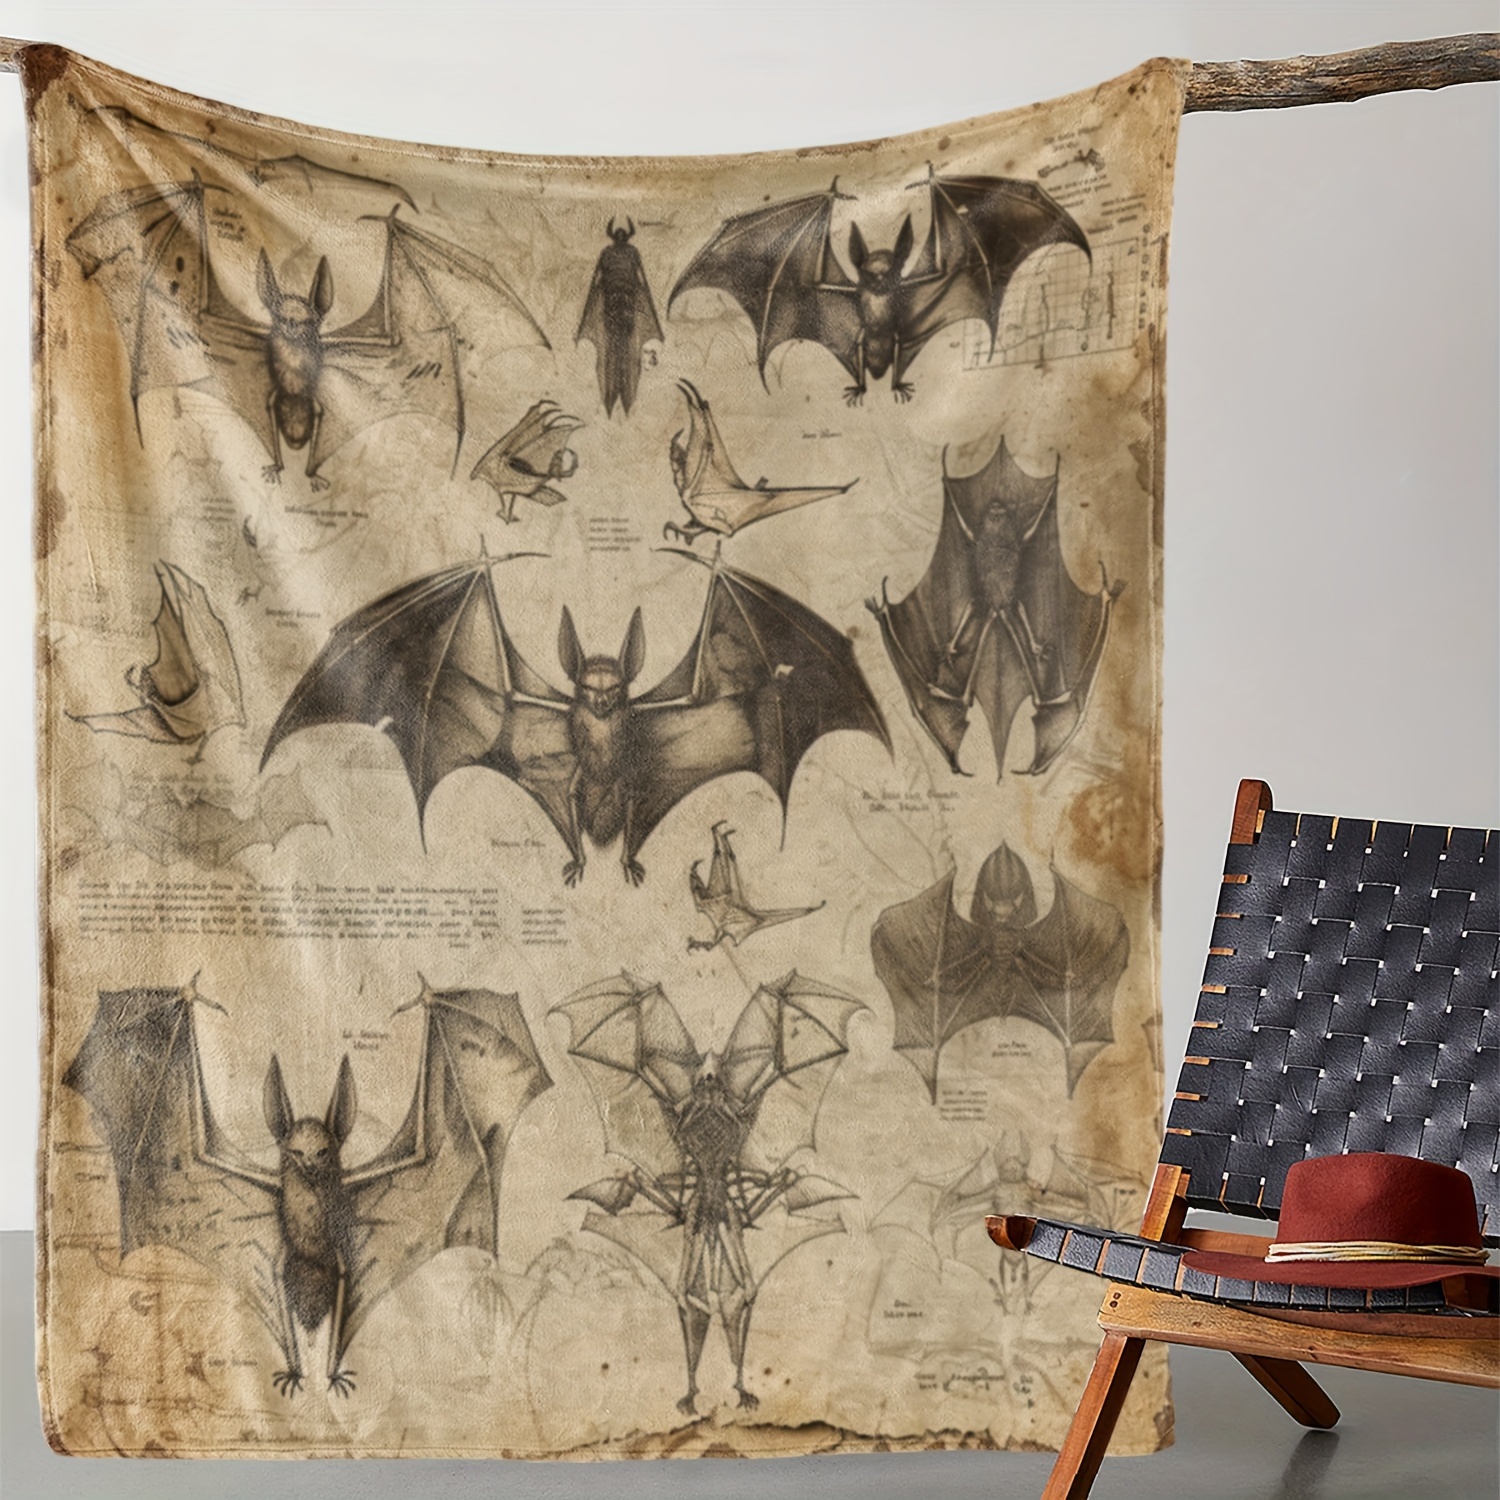 

Vintage Bat Print Flannel Throw Blanket - Soft Cozy Warm Polyester Throws For Sofa, Bed, Office, And Travel - All-season Woven Throw With Unique Embellishments - Great Gift For All Occasions